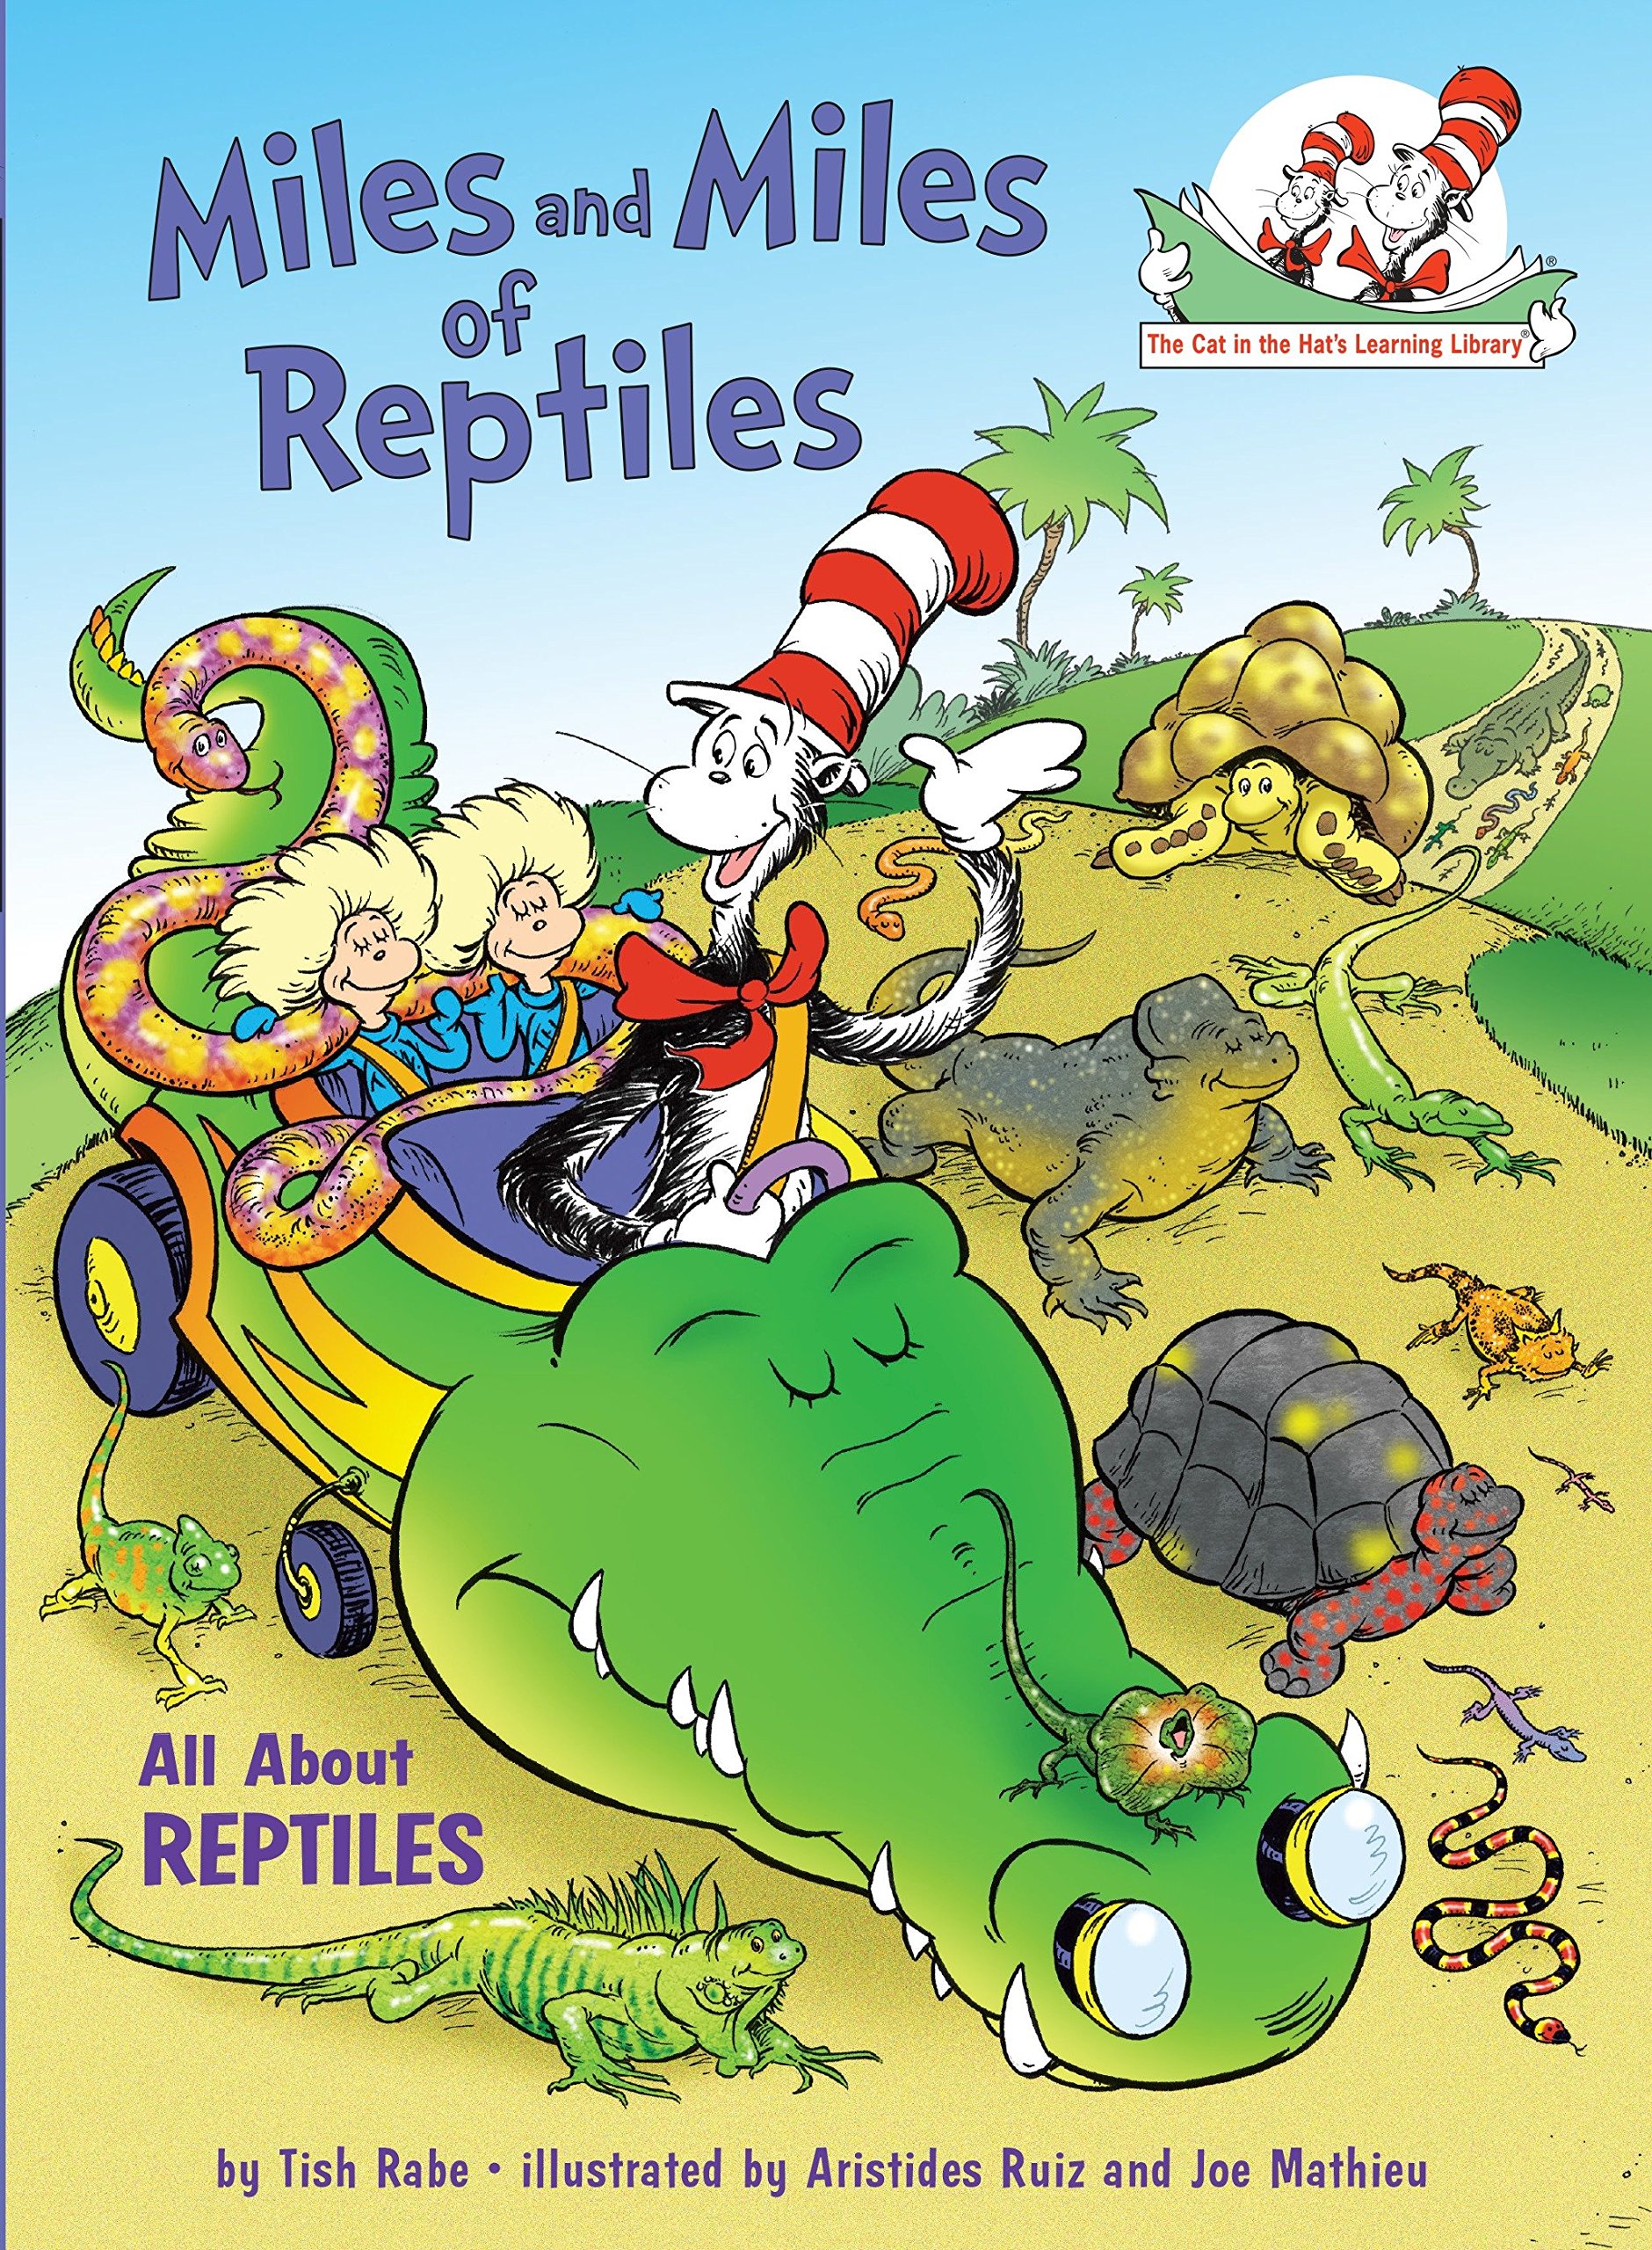 Miles and miles of reptiles